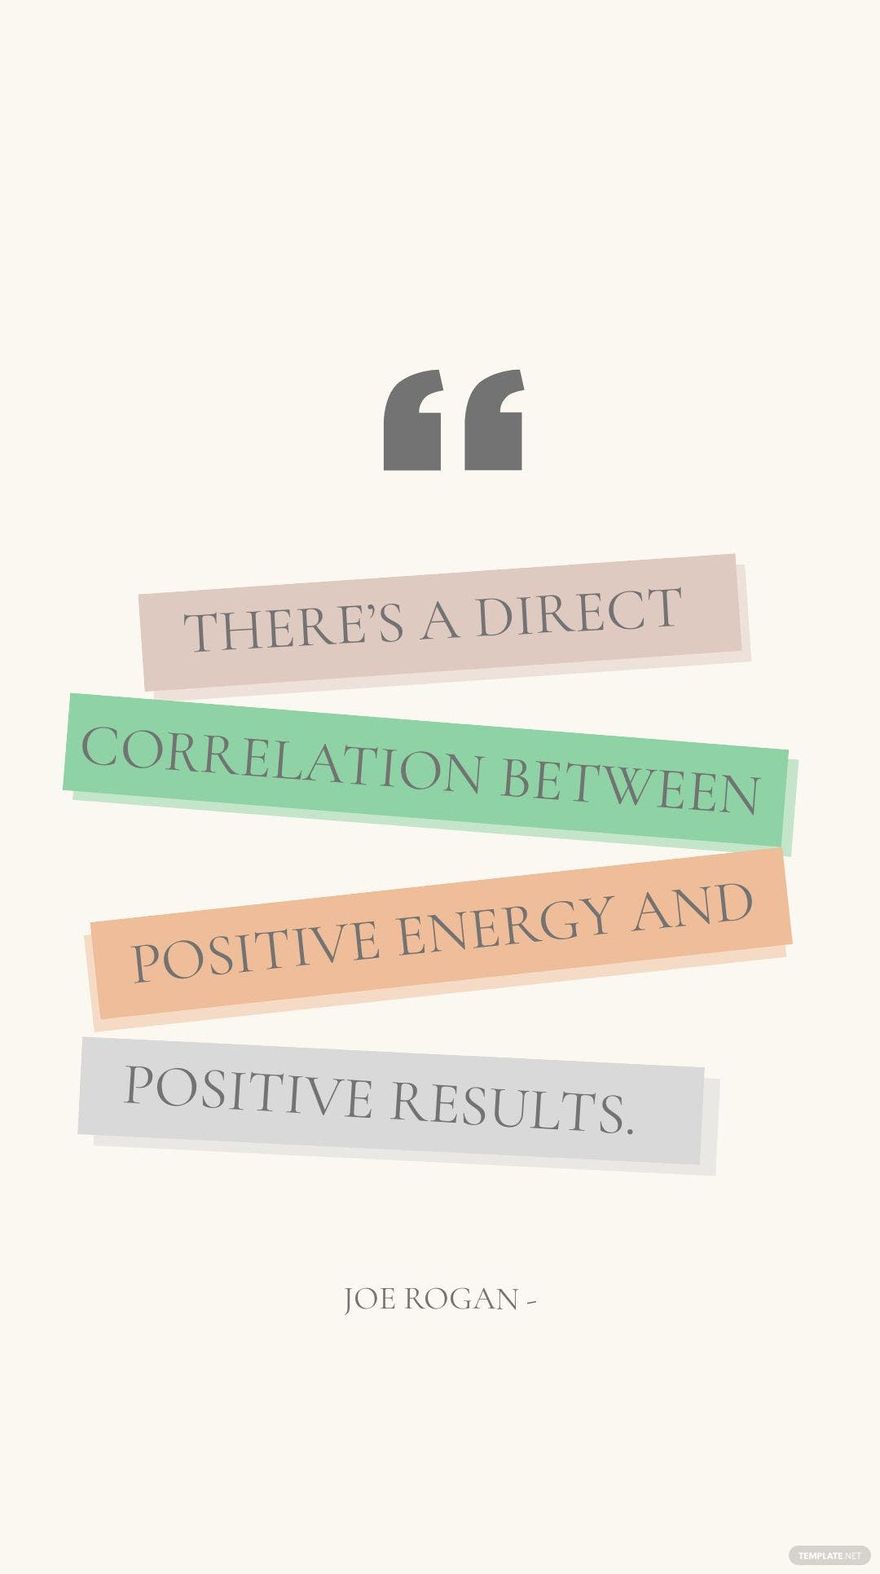 Joe Rogan - There’s a direct correlation between positive energy and positive results.